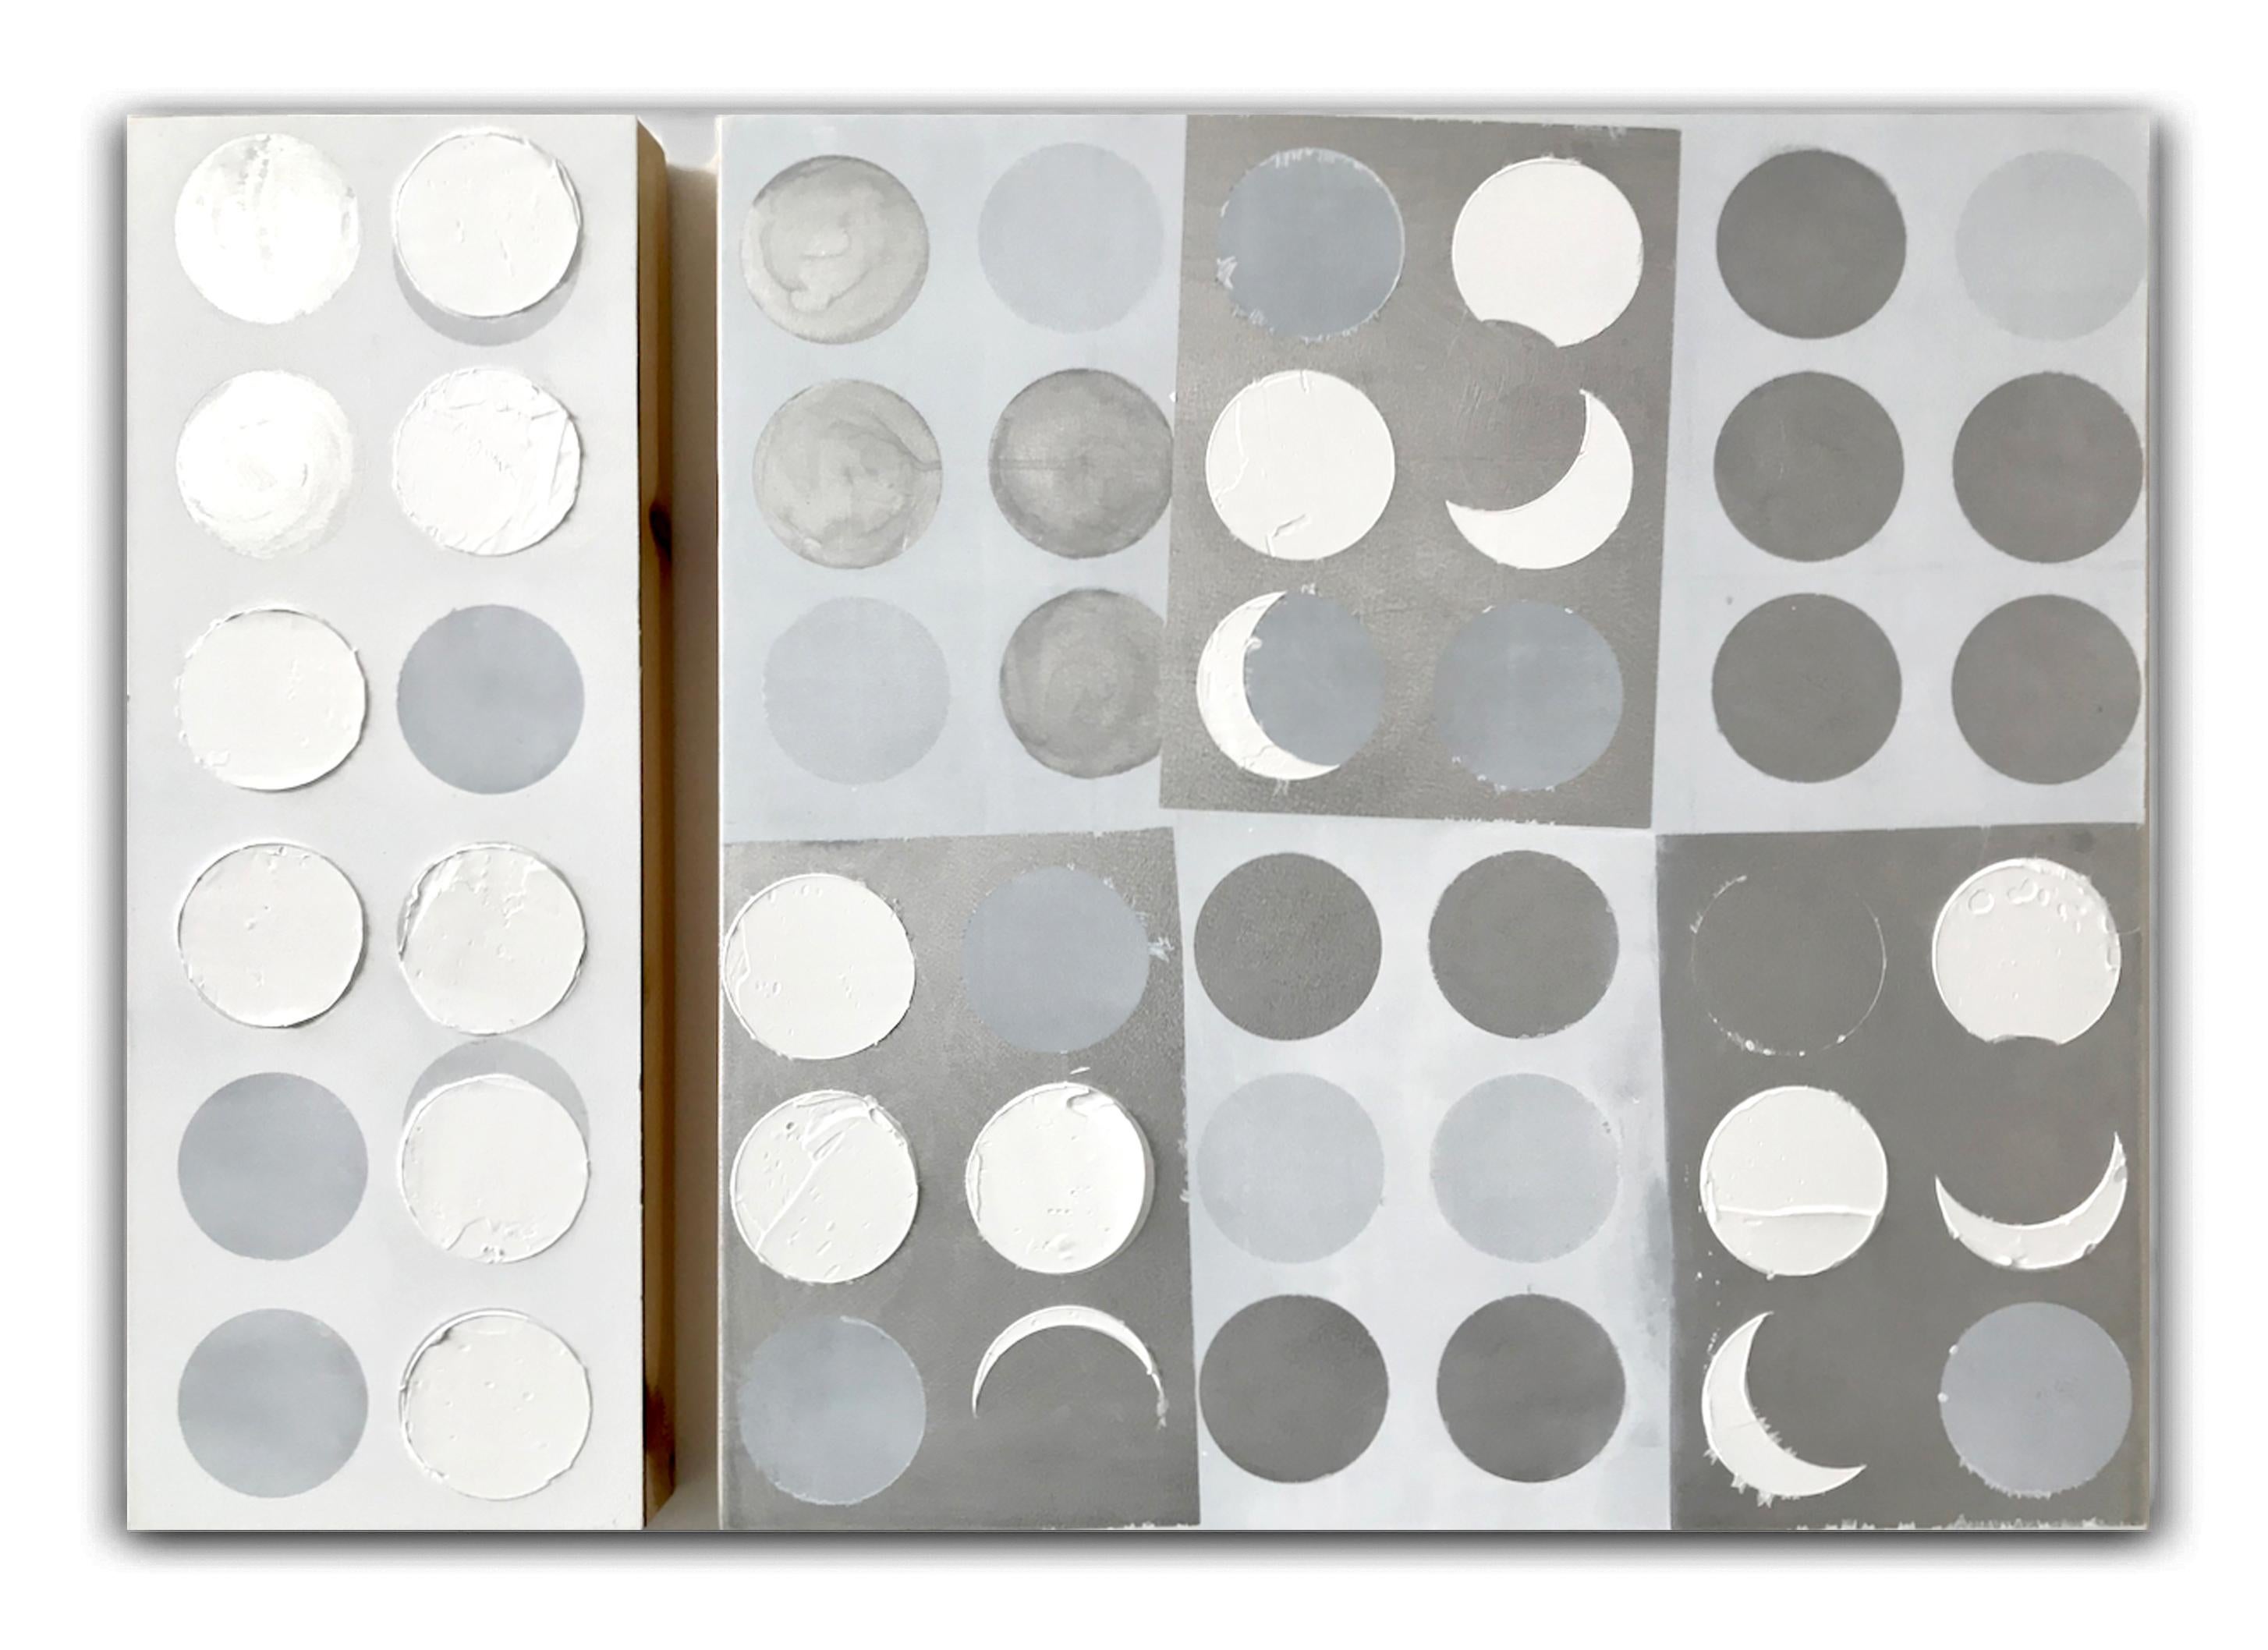 Untitled (Aluminium circles) (Abstract Painting)

Acrylic on aluminium - Unframed

This artwork is exclusive to IdeelArt.

Dyptich: 60 x 22 cm / 23.6 x 8.6 inch and 60 x 60 cm / 23.6 x 23.6 inch

Influenced by 20th century abstract modernist